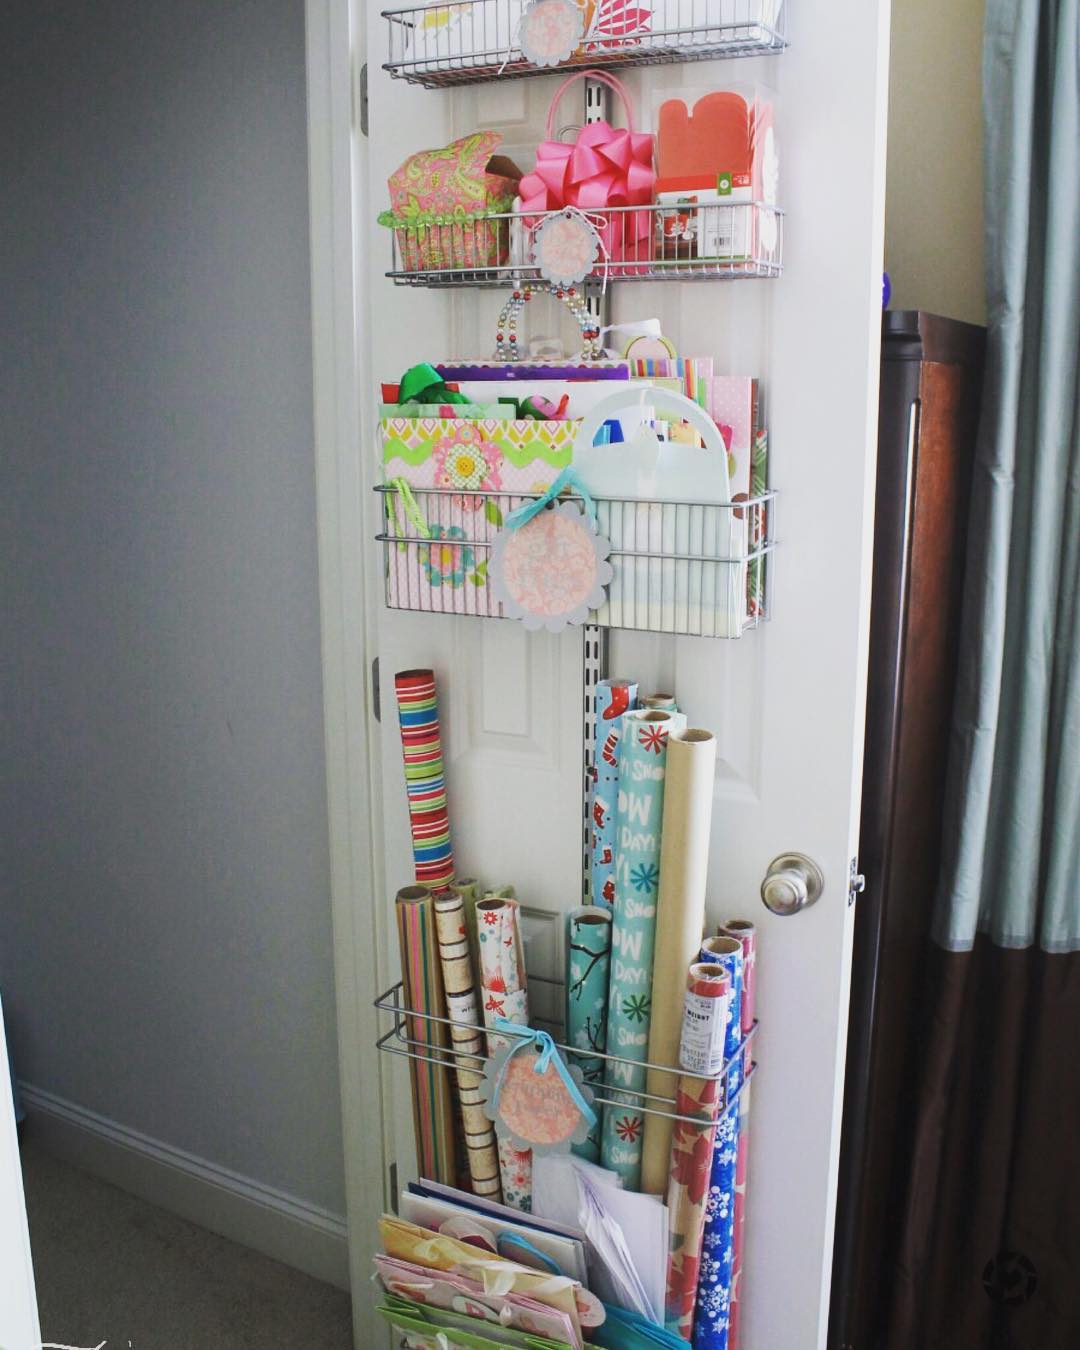 Door storage with wrapping paper and gift supplies. Photo by Instagram user @turquoisehome